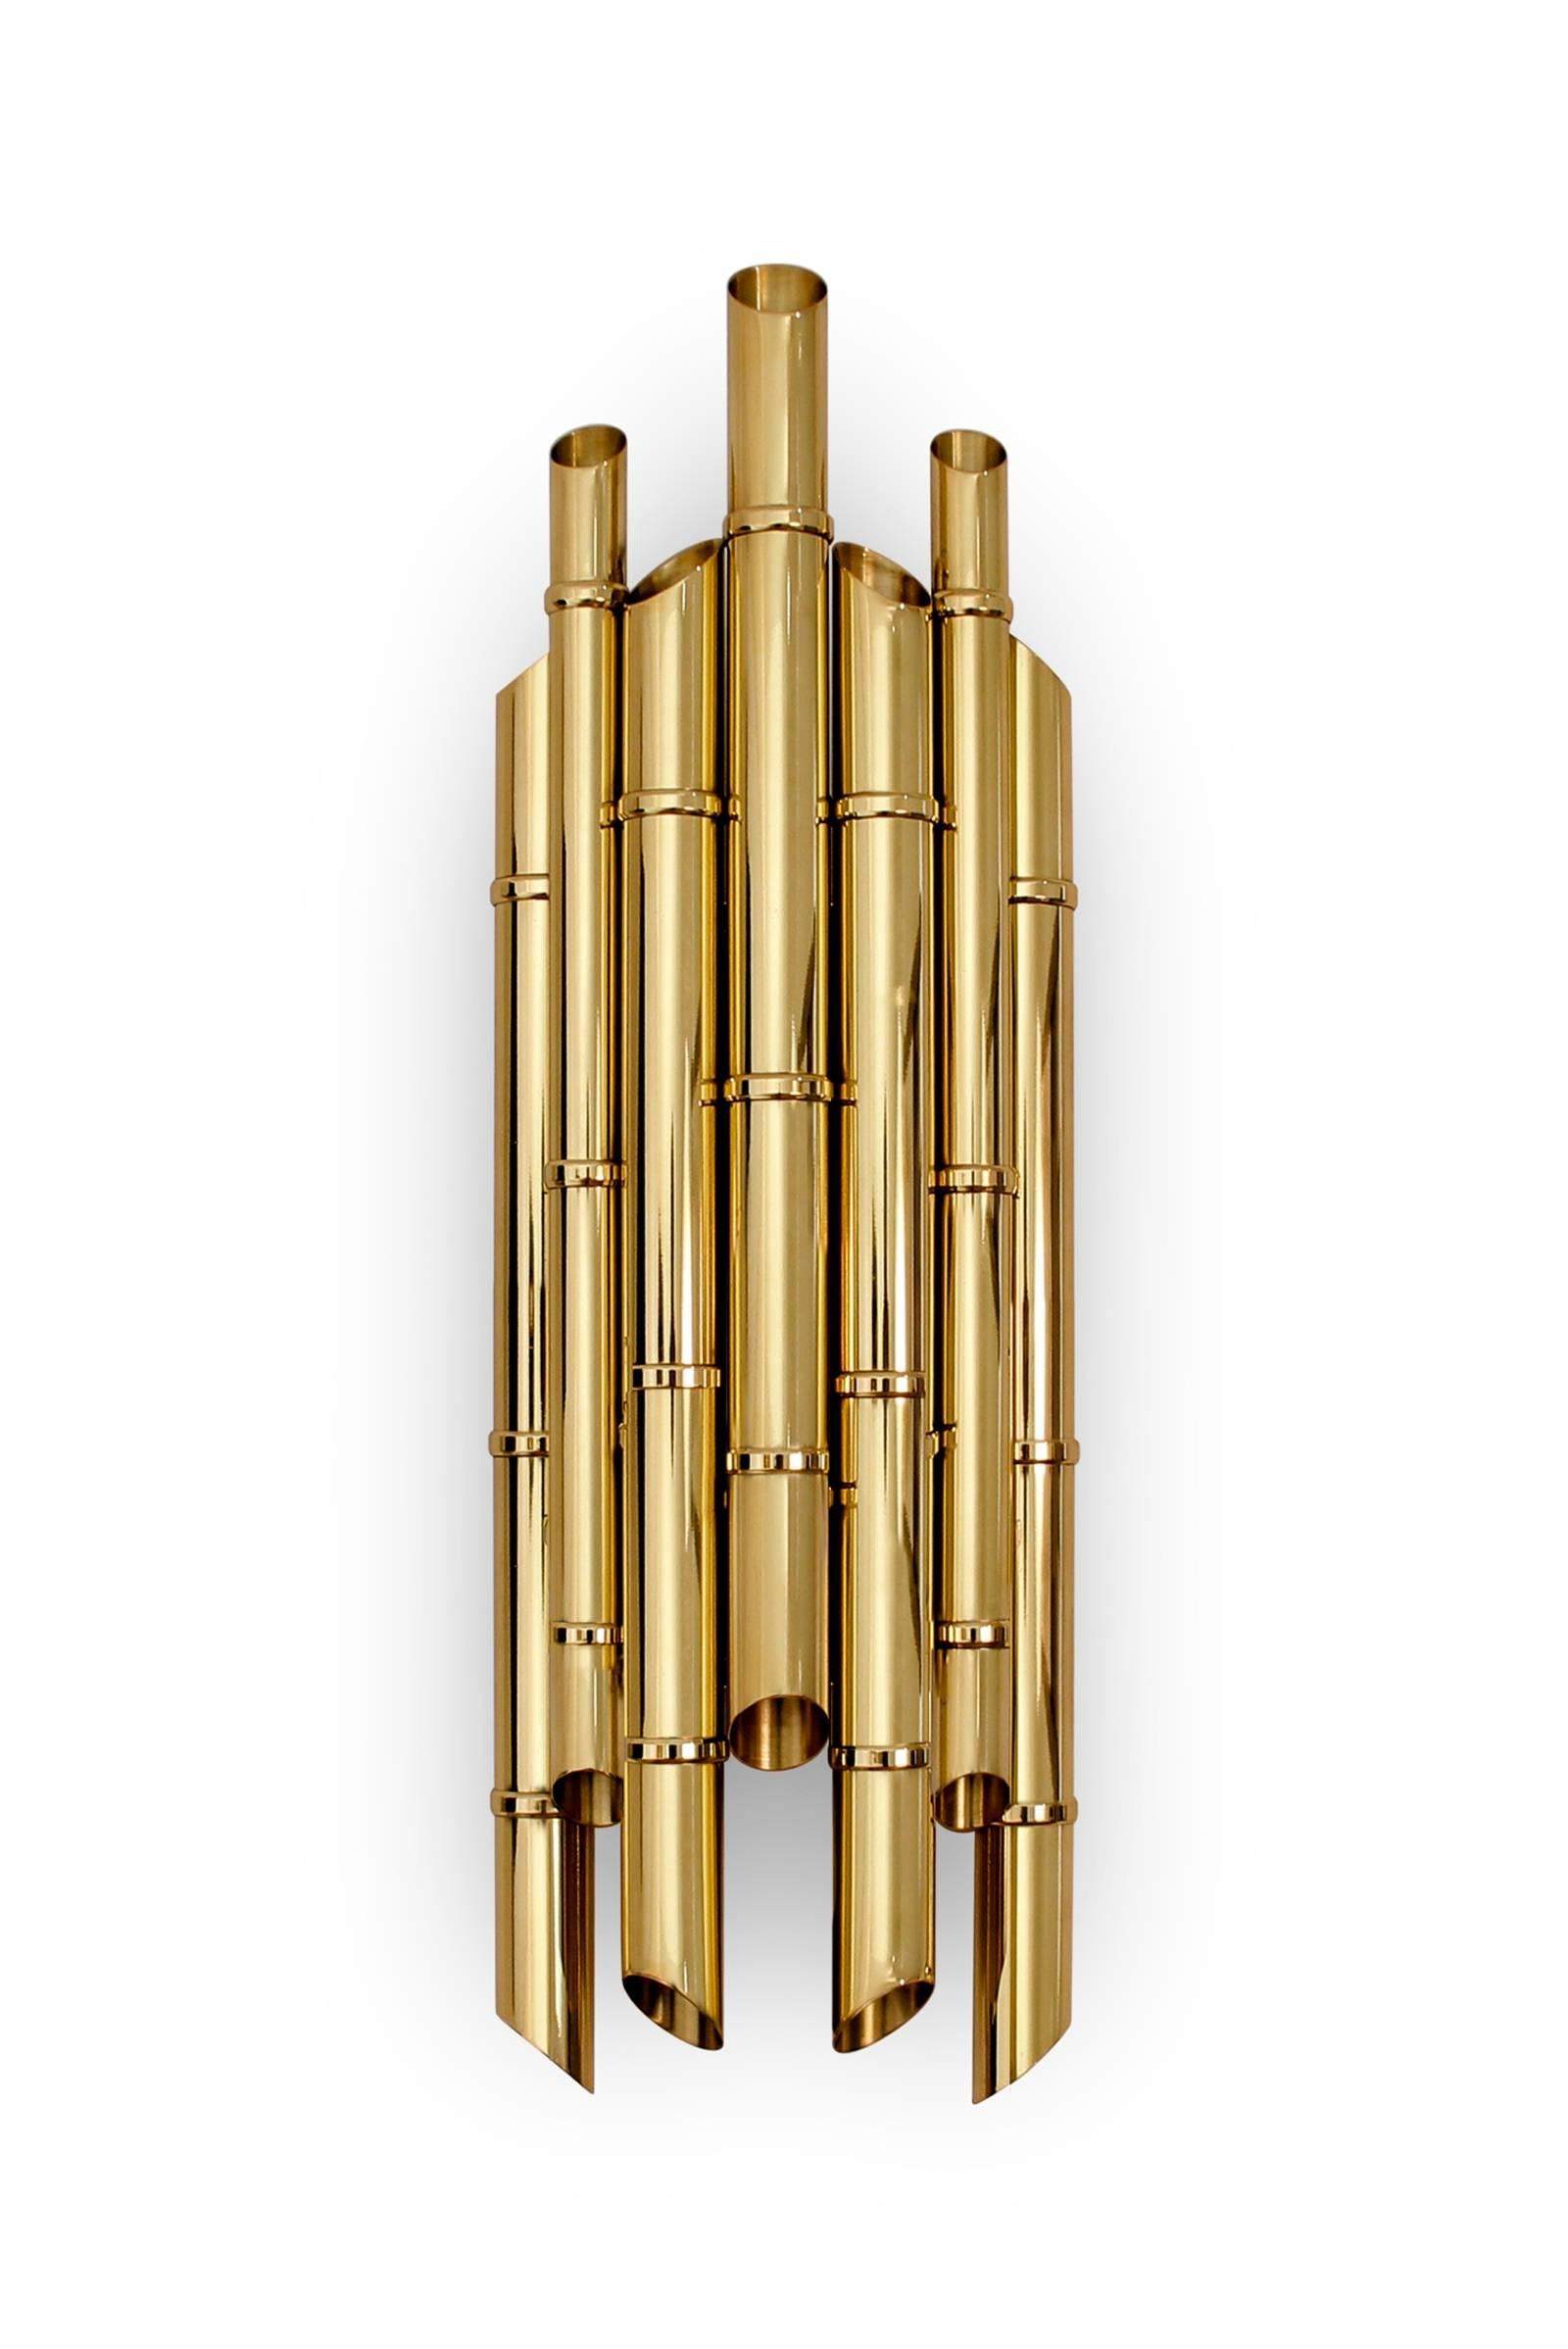 Wall lamp bamboo with all structure 
in solid brass in polished finish.
Also available in Bamboo XL size, on request.